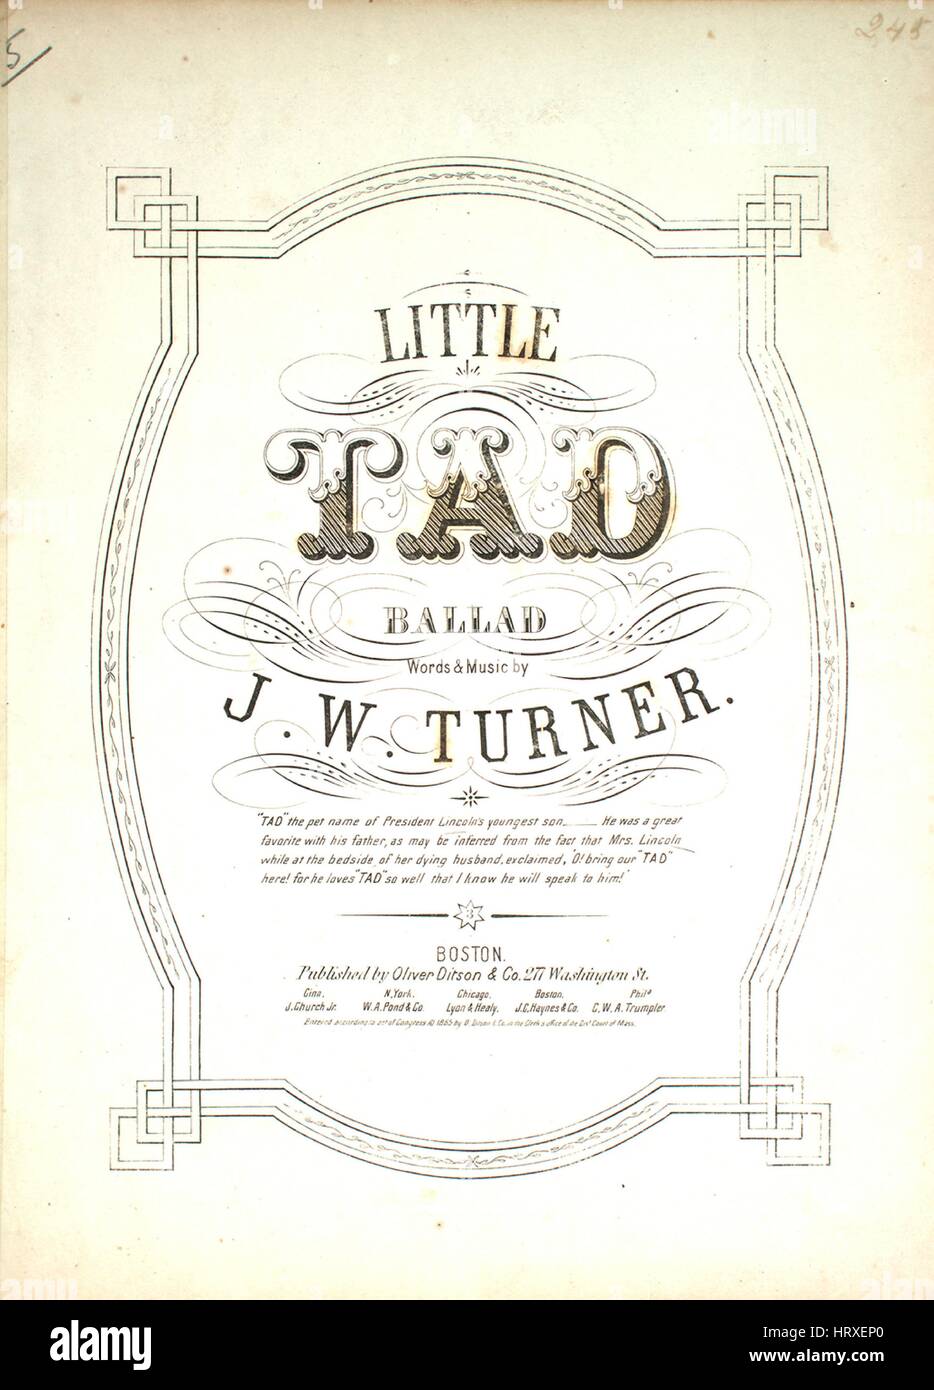 Sheet music cover image of the song 'Little Tad Ballad', with original authorship notes reading 'Words and Music by JW Turner', United States, 1865. The publisher is listed as 'Oliver Ditson and Co., 277 Washington St.', the form of composition is 'strophic', the instrumentation is 'piano and voice', the first line reads 'God bless the little orphan boy! A father's darling pride', and the illustration artist is listed as 'None'. Stock Photo